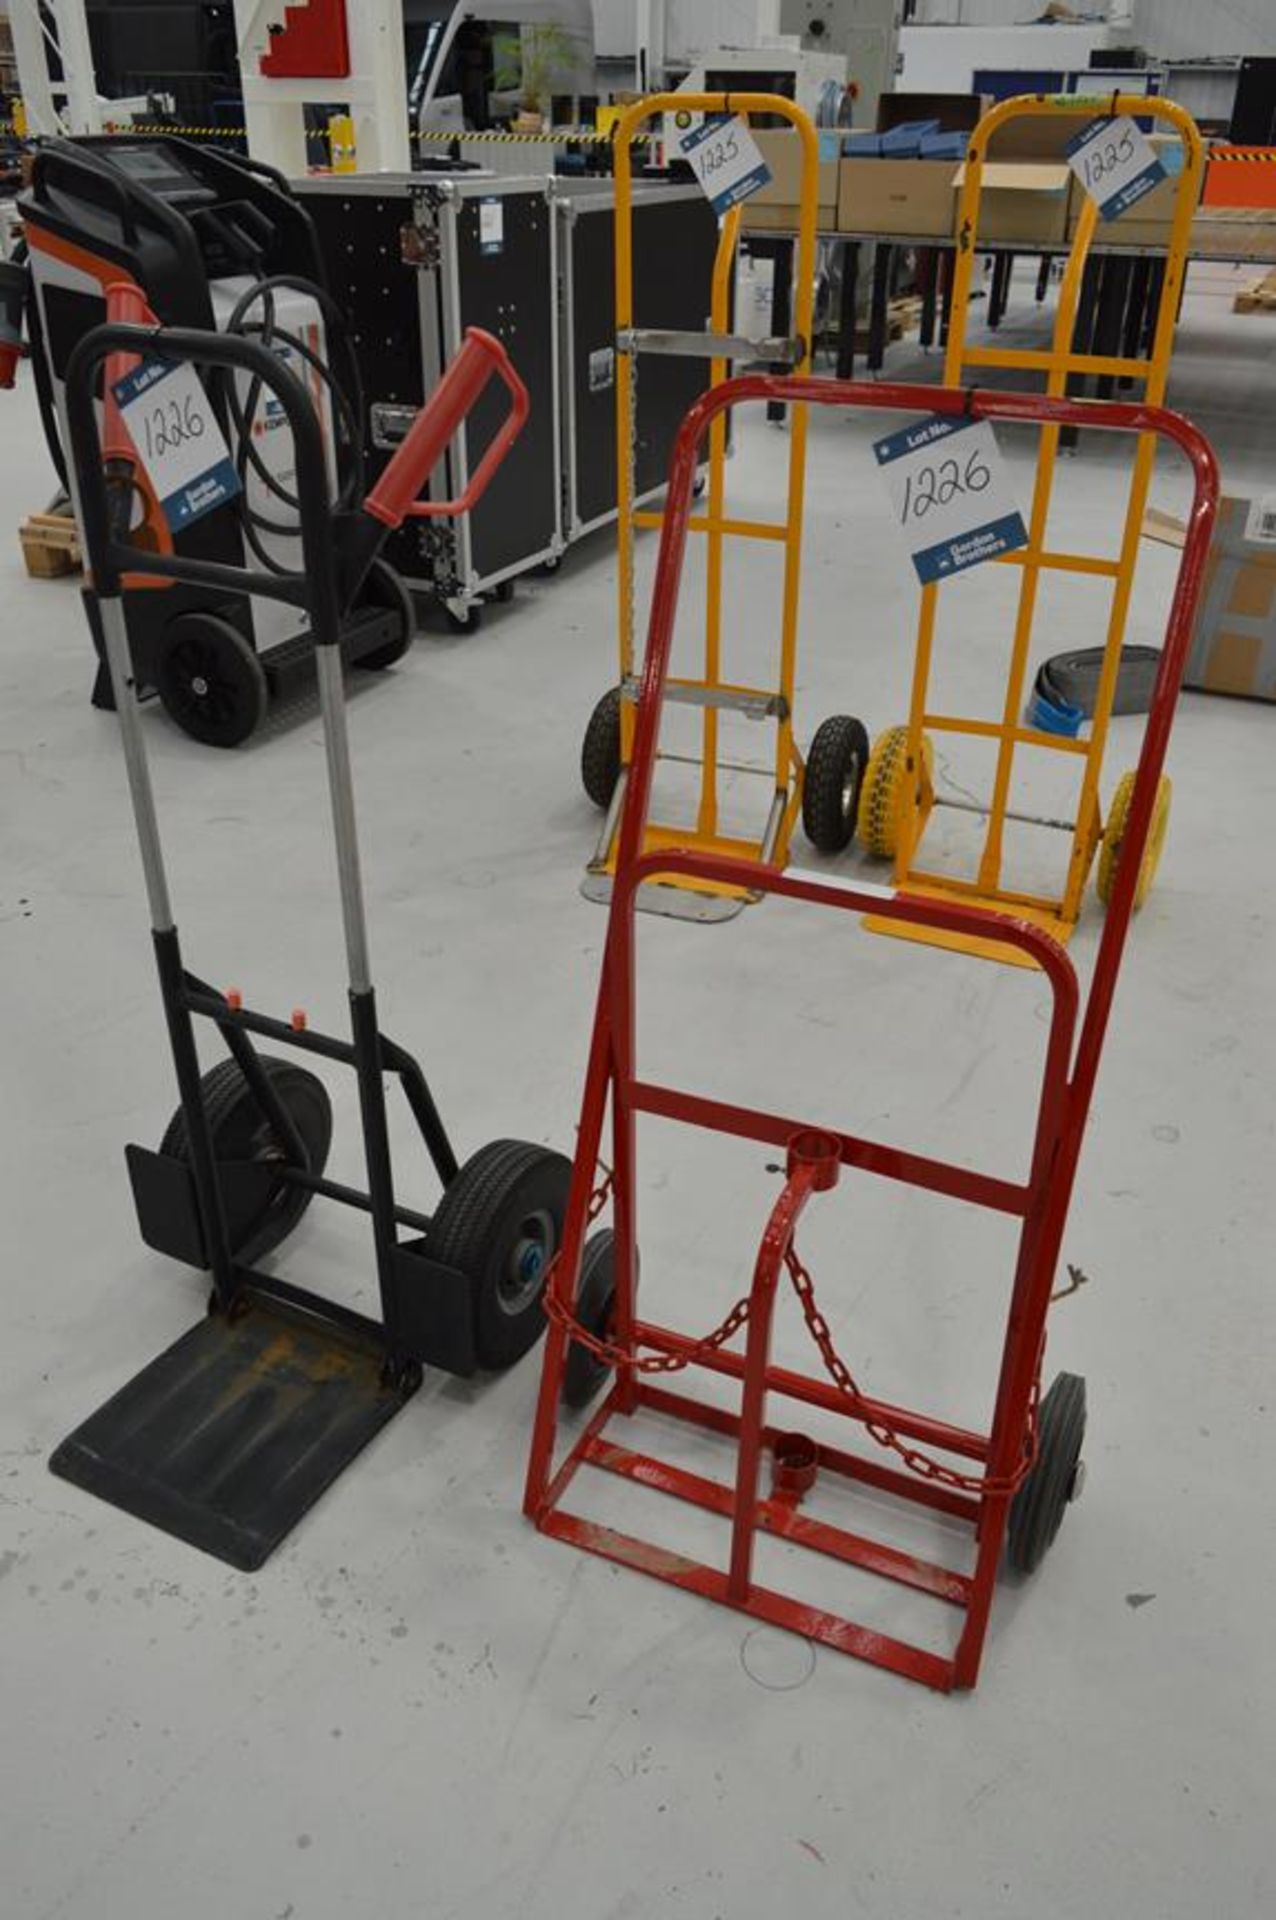 Sack truck and bottle trolley